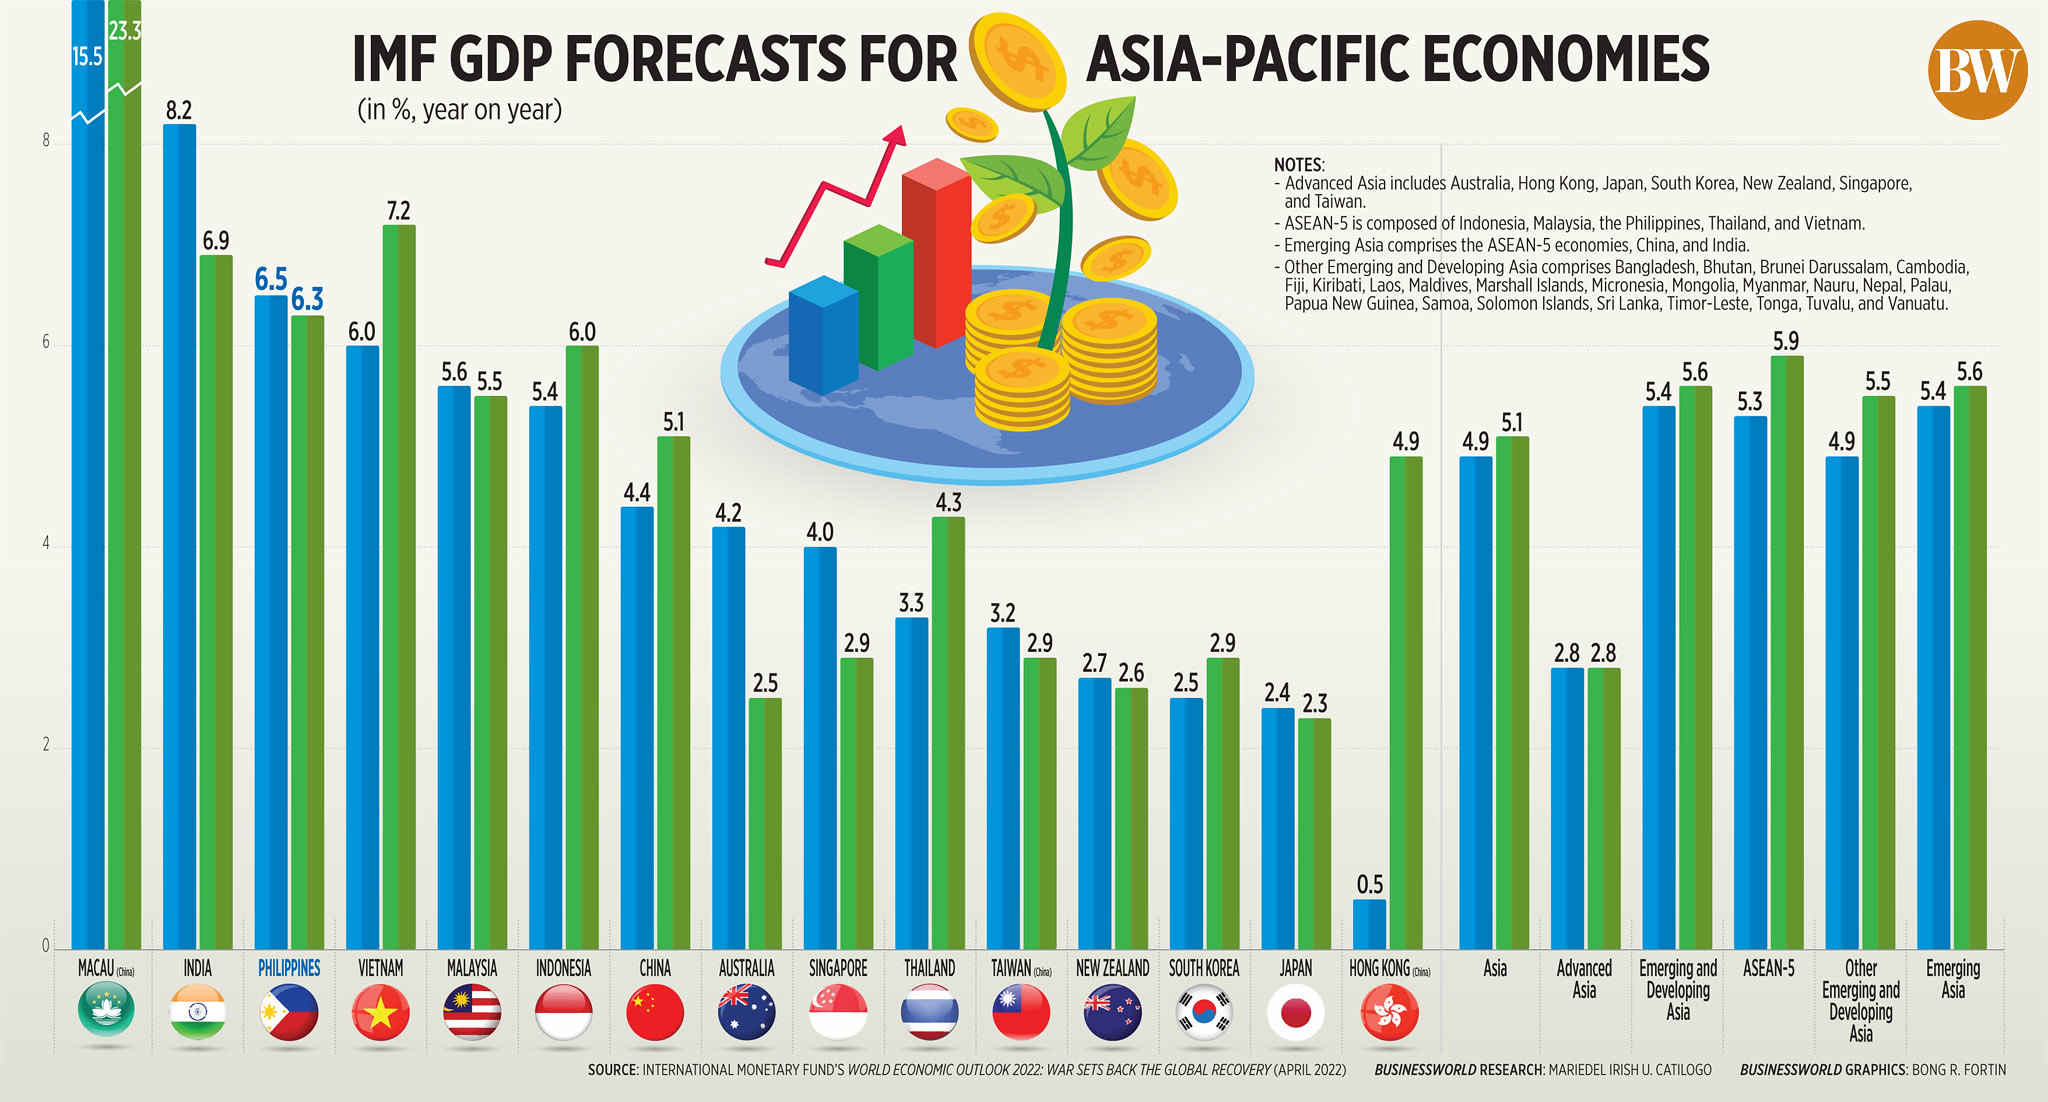 IMF projects 60% of global economic growth from Asian countries. 